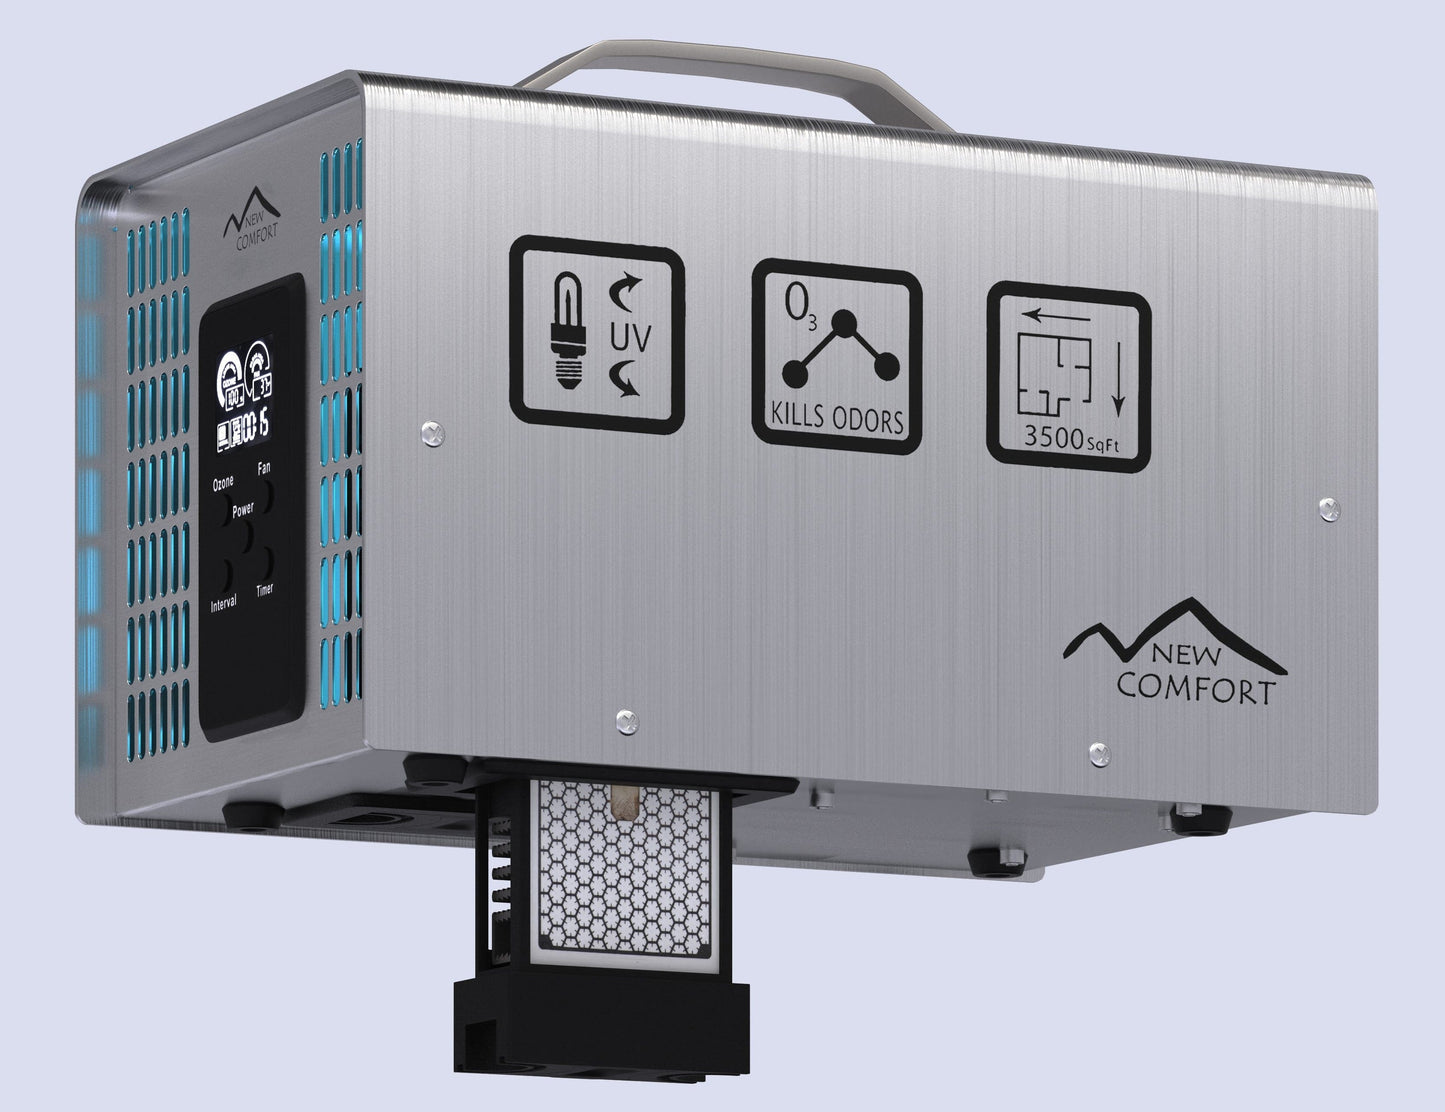 DEMO New Comfort Stainless Steel 9,000 to 14,000 mg/hr Commercial Ozone Generator and Air Purifier